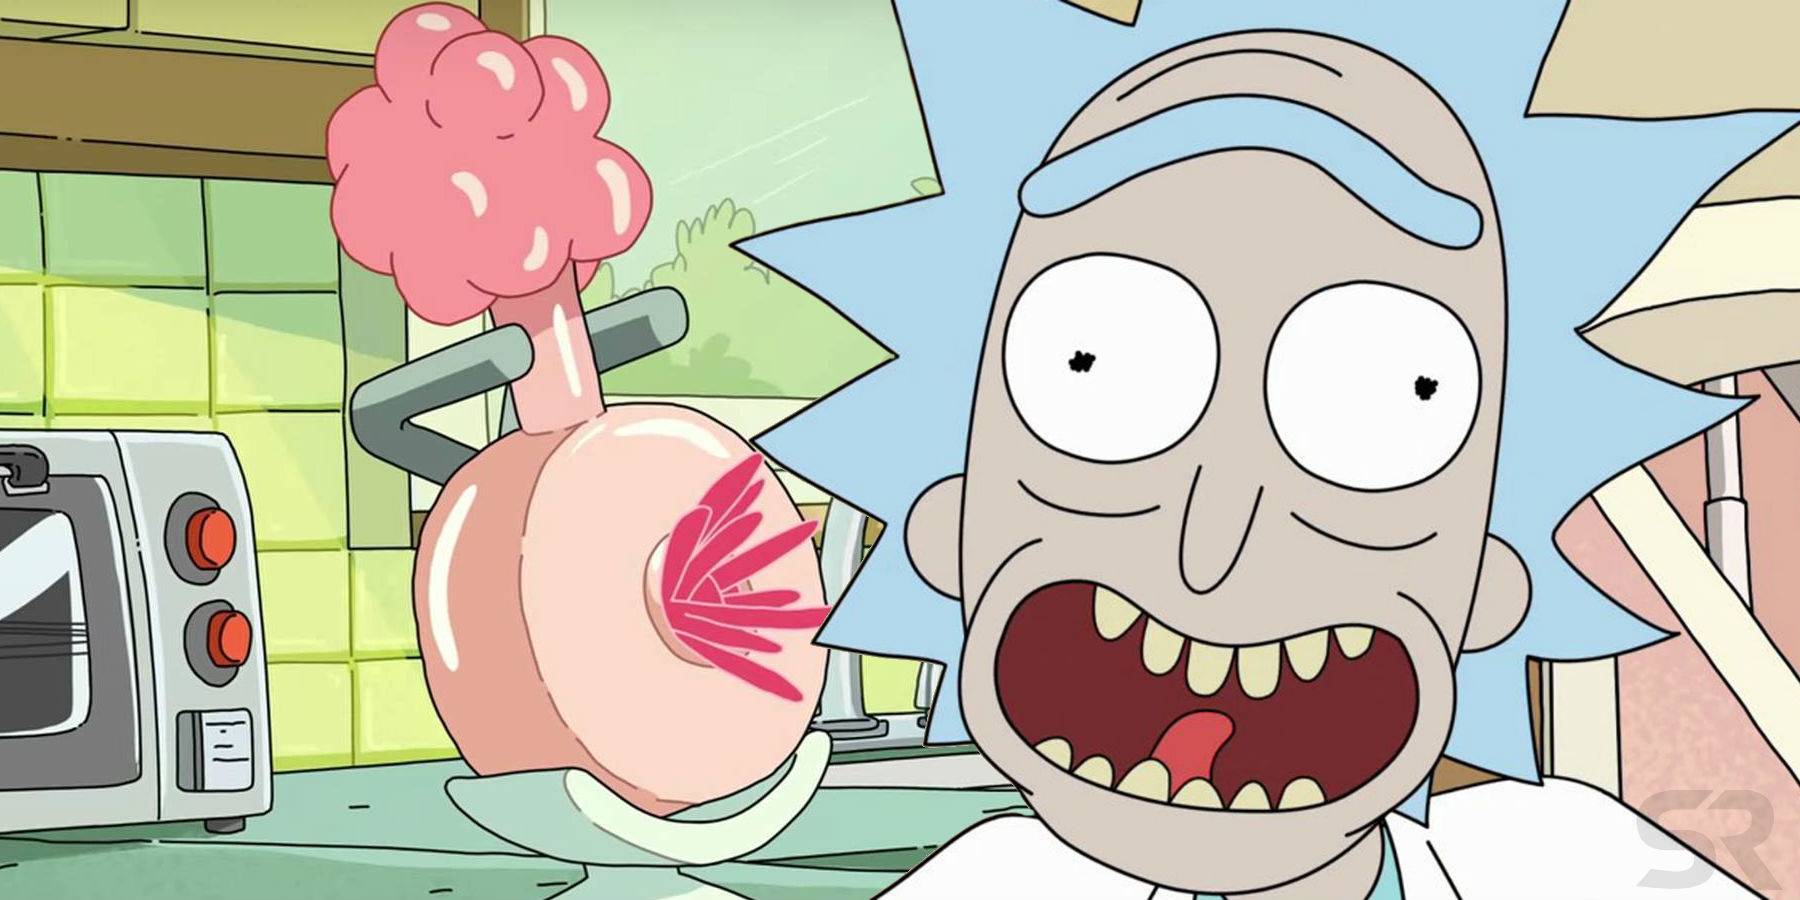 What is a plumbus rick and morty